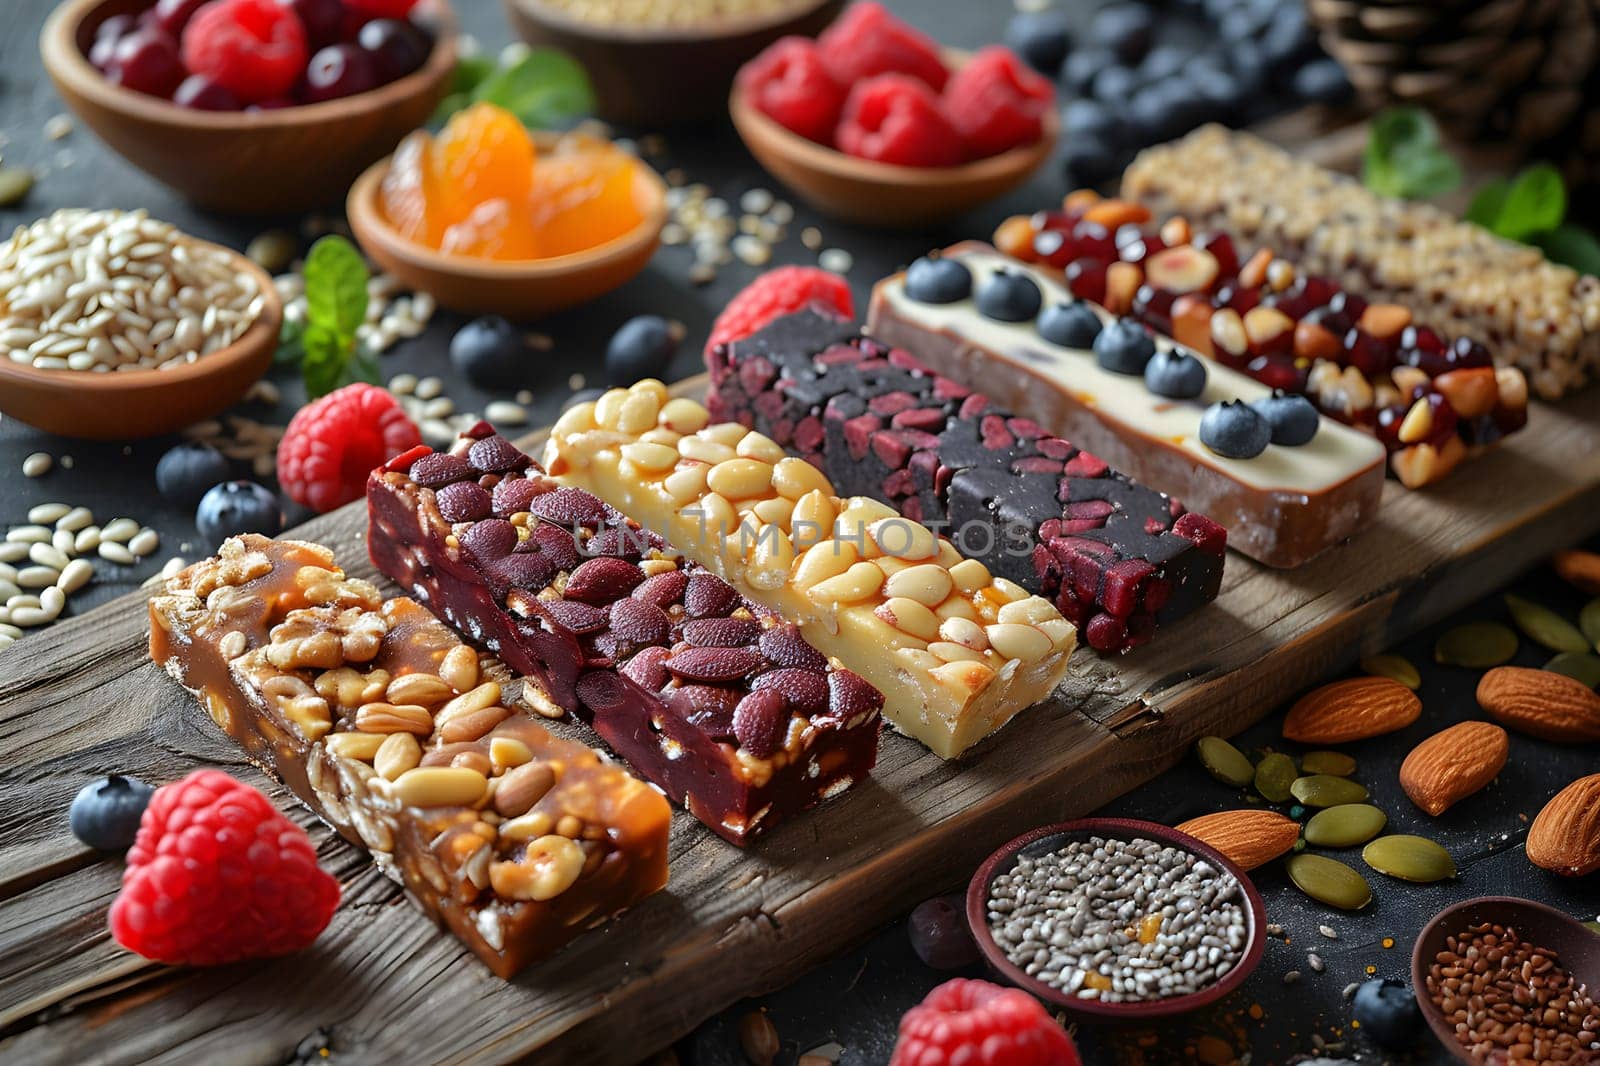 A wooden cutting board displaying a selection of granola bars and fresh berries, perfect for a healthy snack or breakfast option. Made with natural ingredients and whole foods